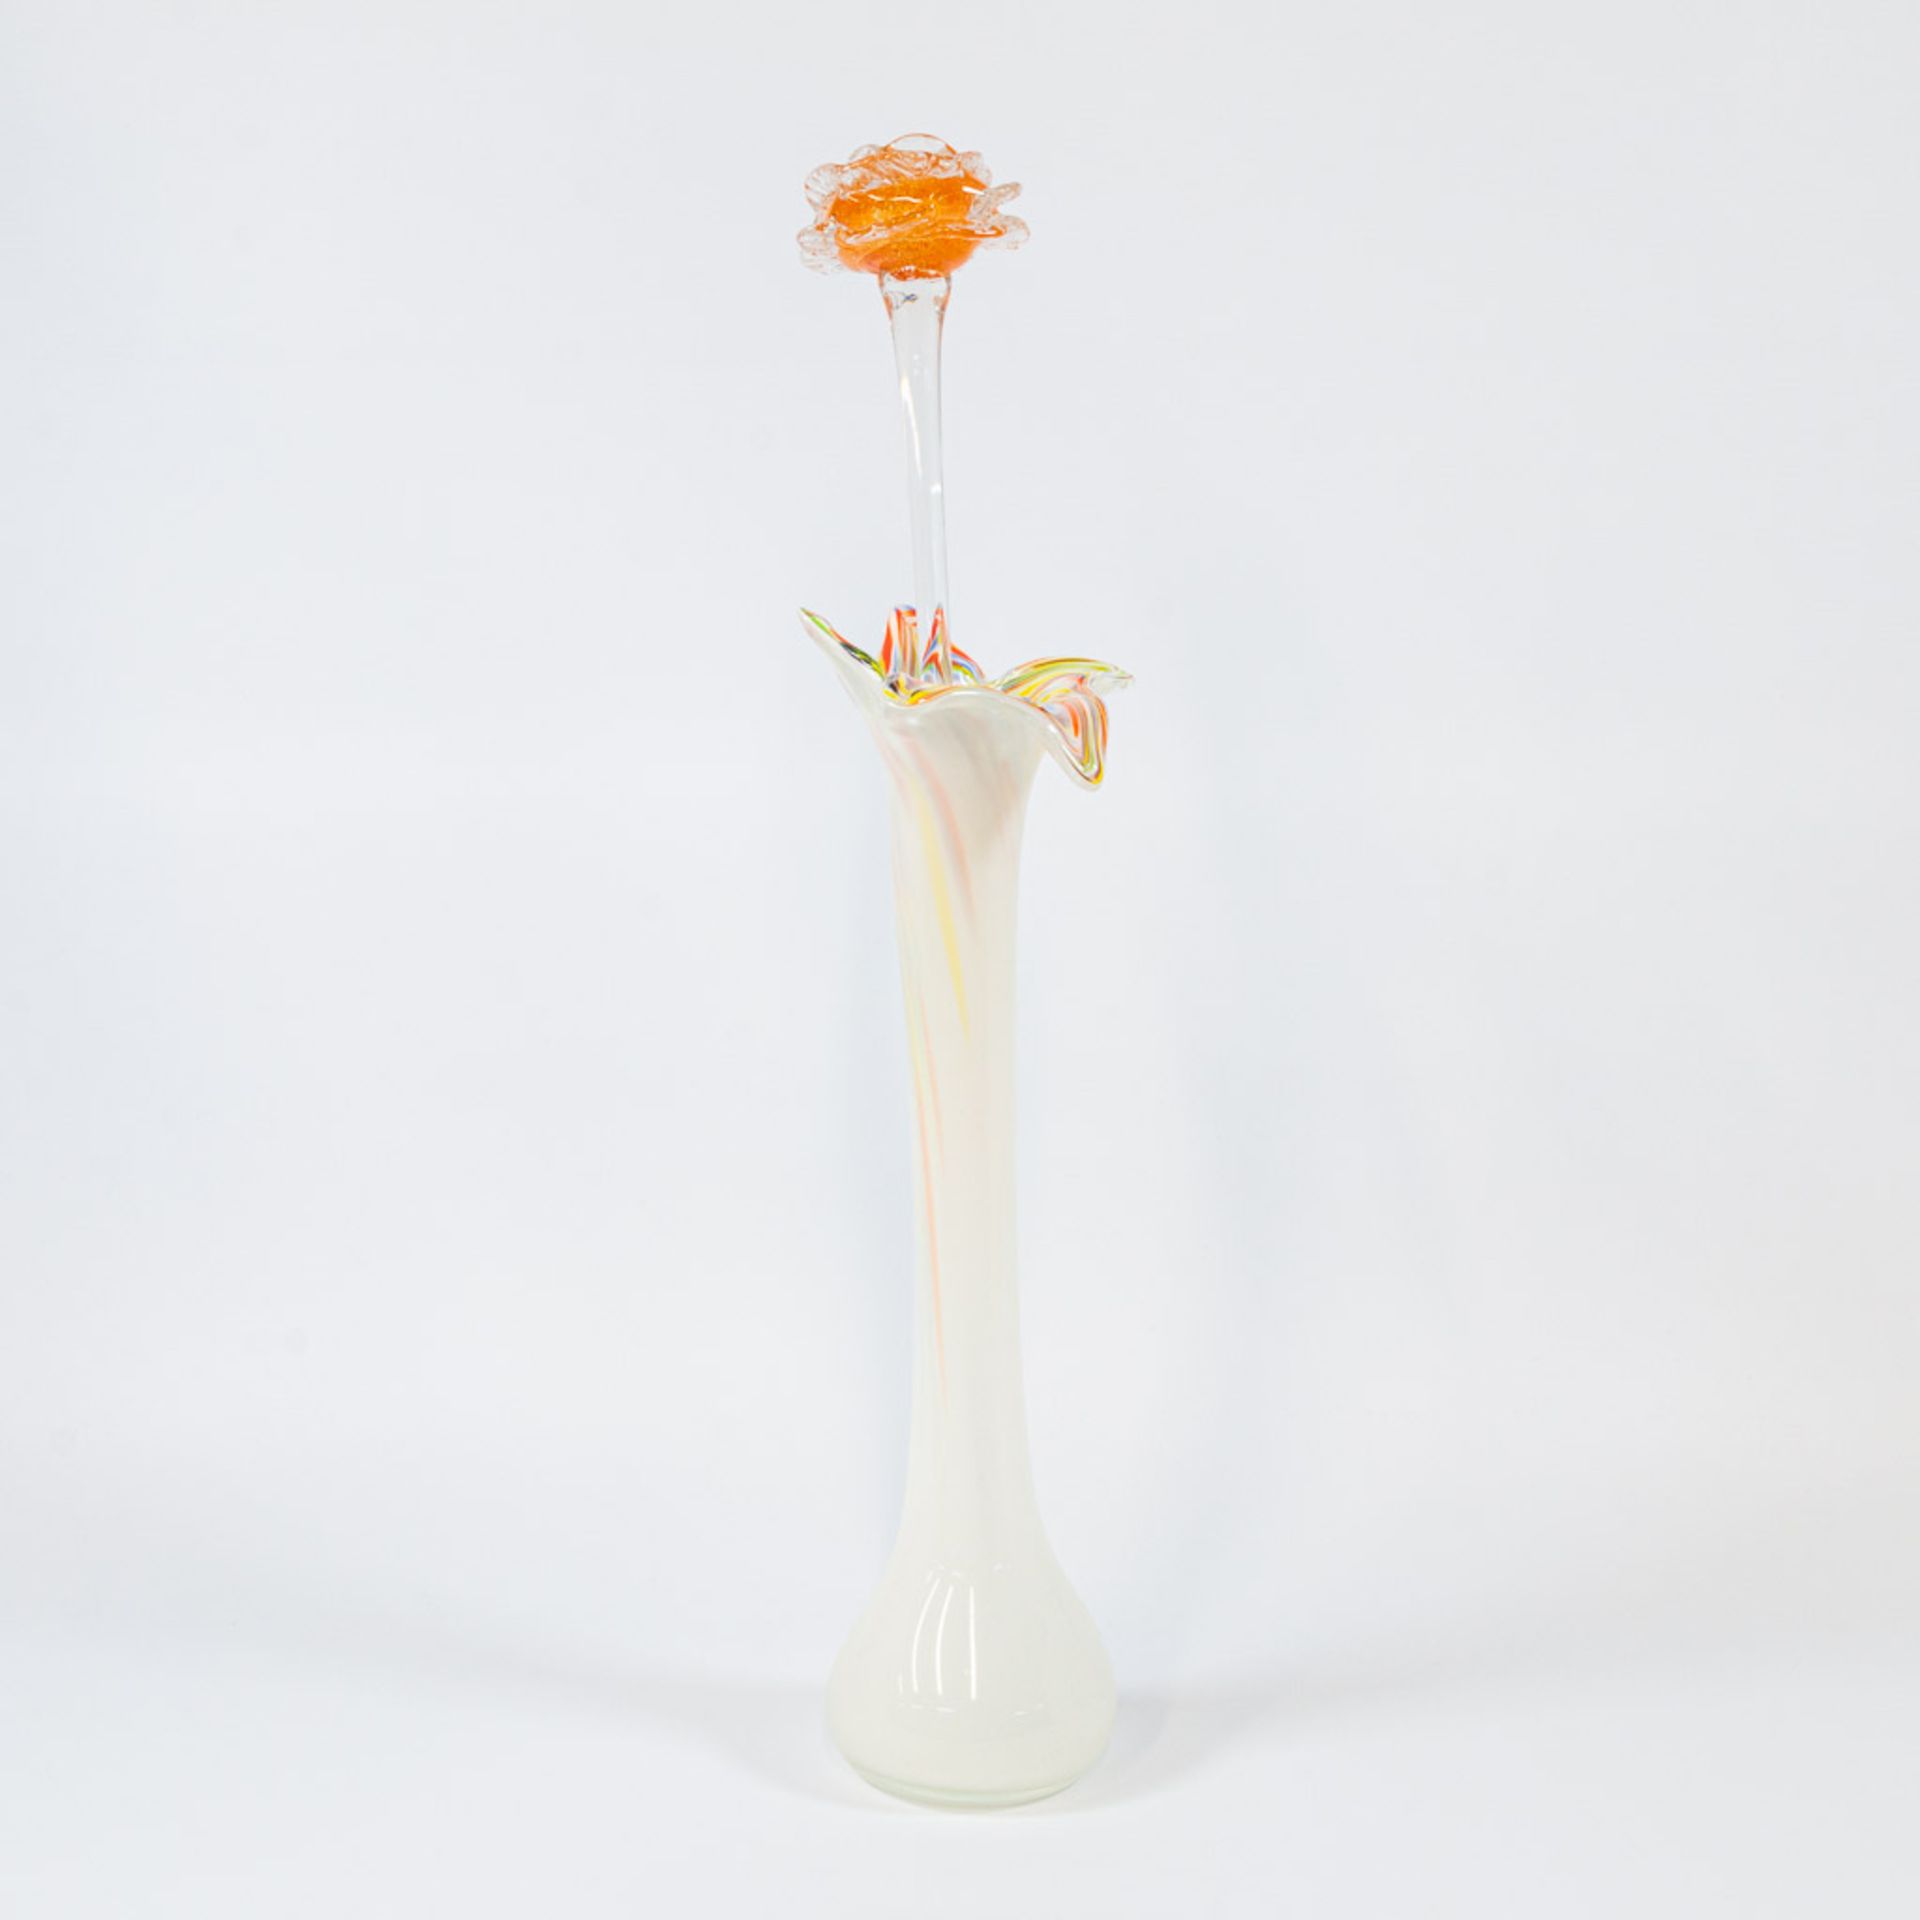 A collection of 4 vases and 4 glass flowers made in Murano, Italy. - Image 10 of 49